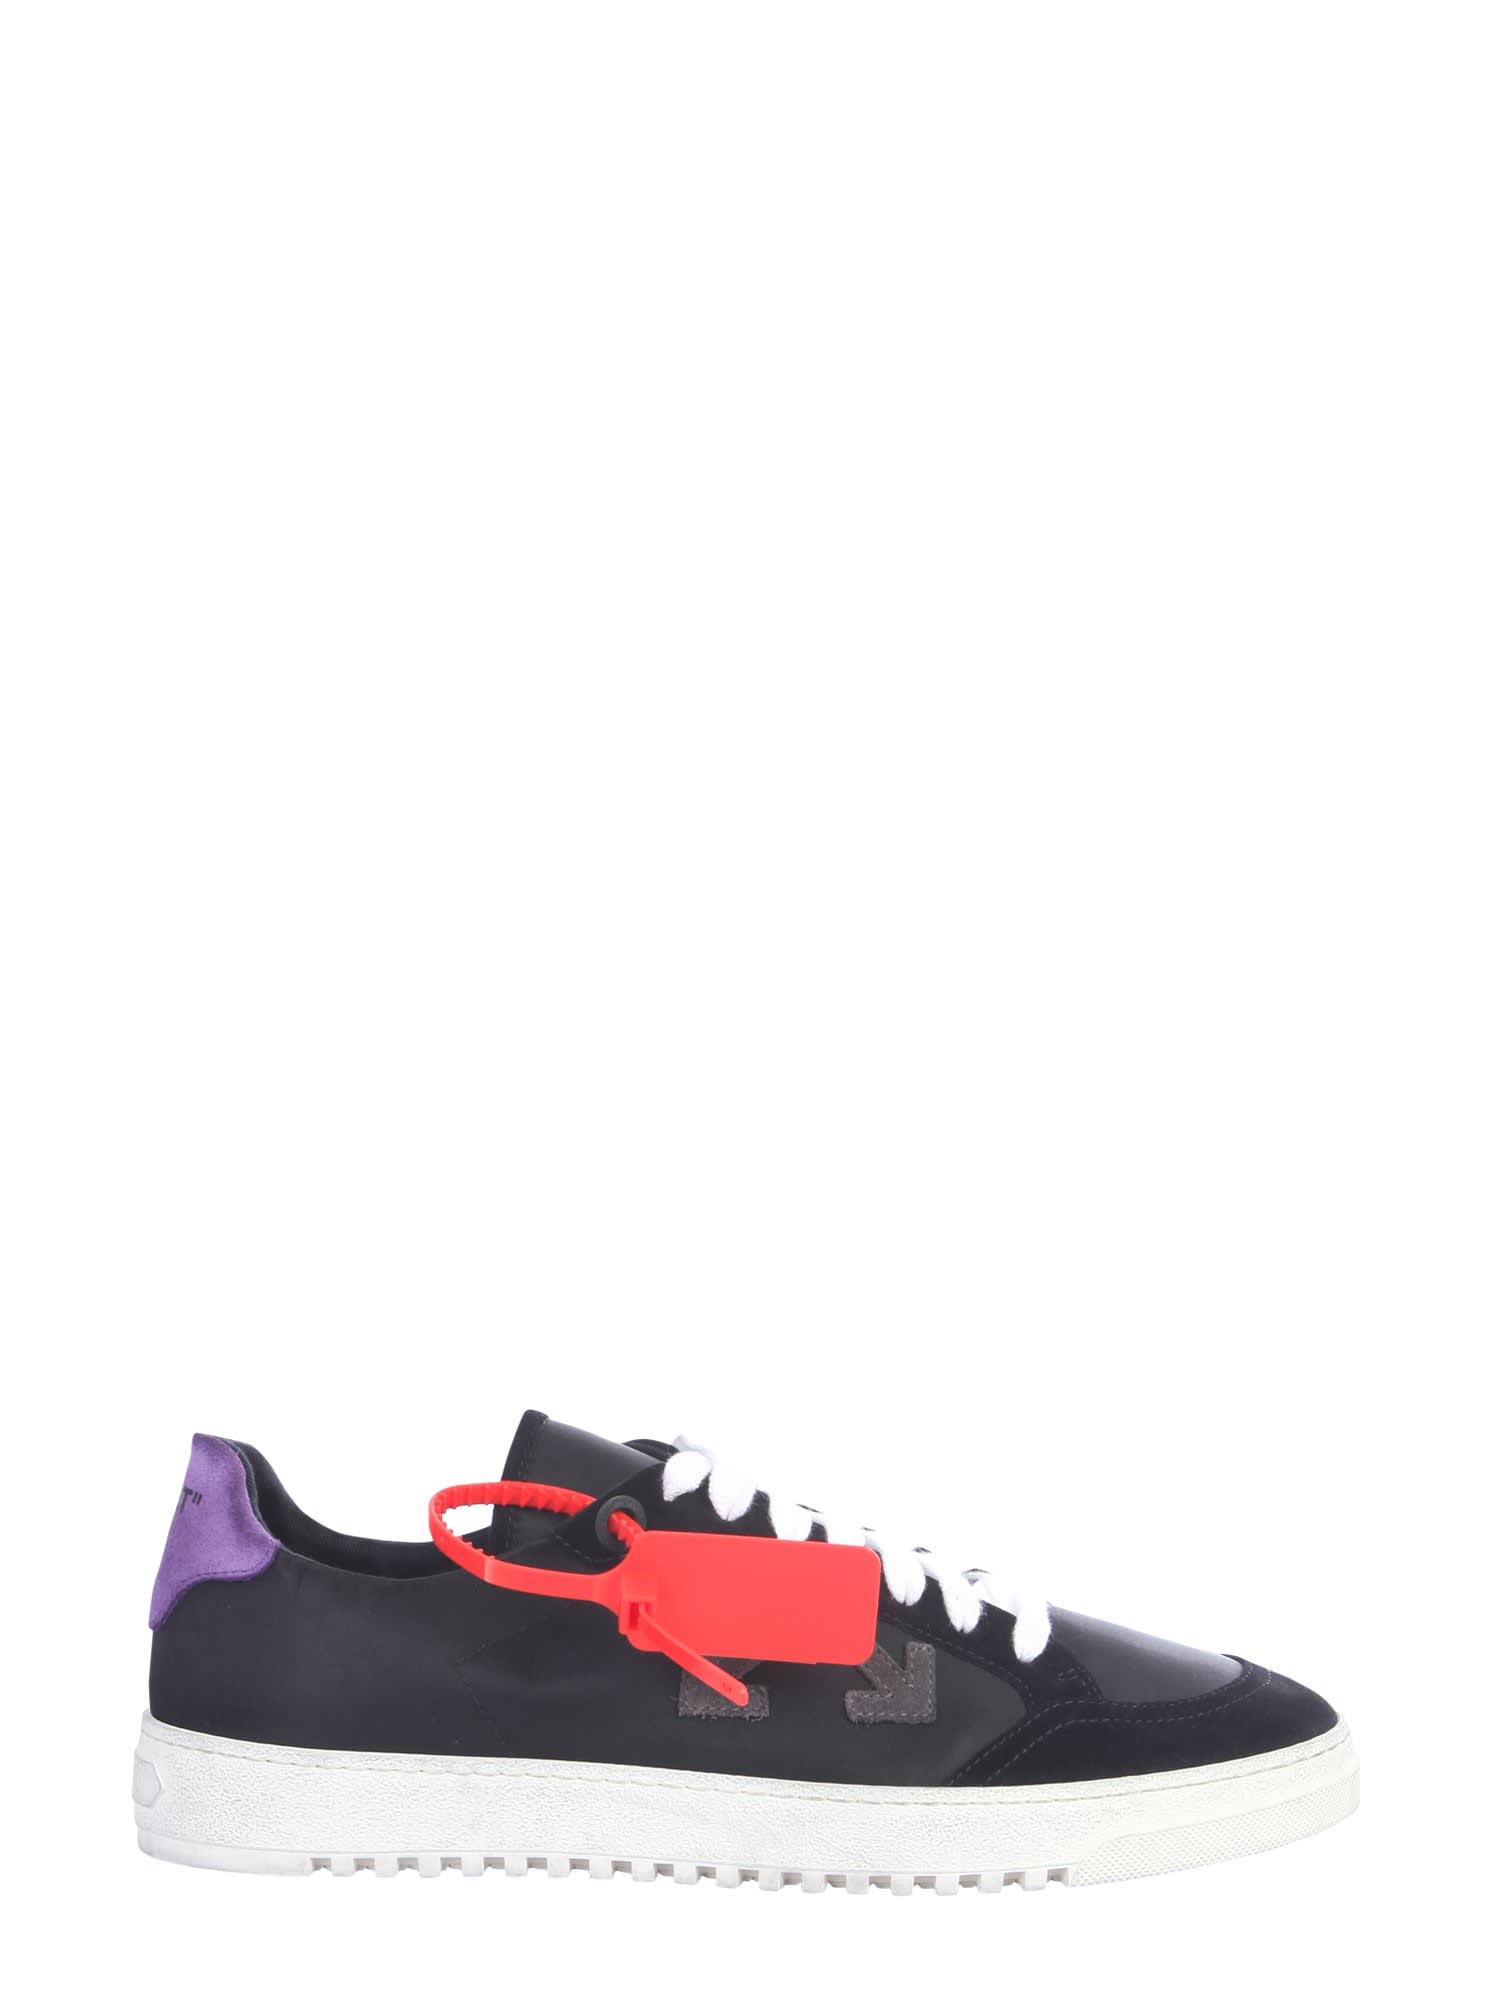 OFF-WHITE 2.0 LOW trainers,11266209